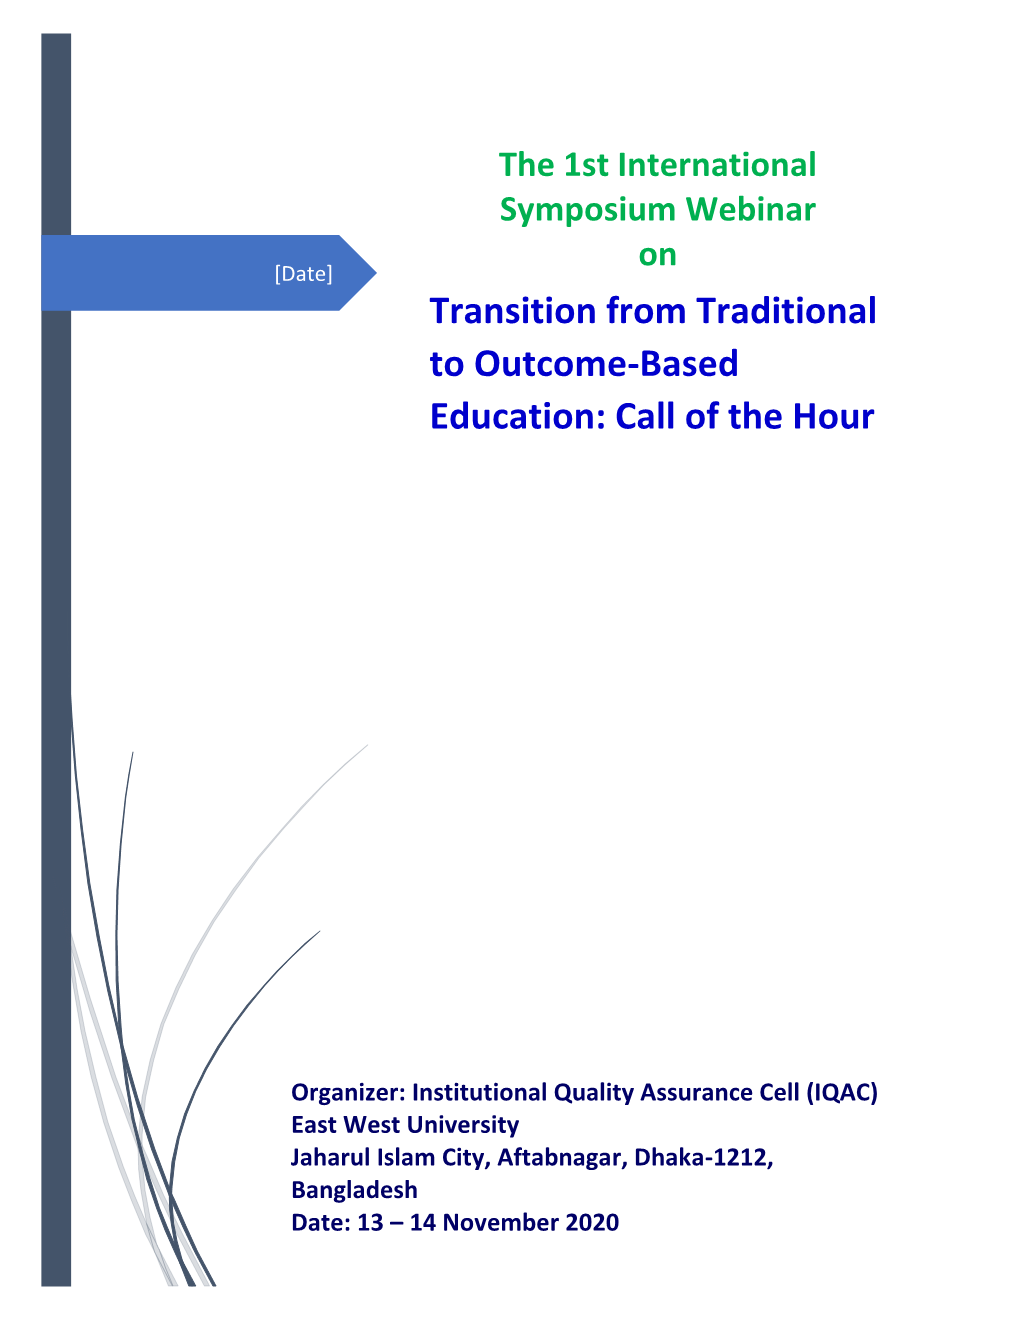 The 1St International Symposium Webinar on [Date] Transition from Traditional to Outcome-Based Education: Call of the Hour